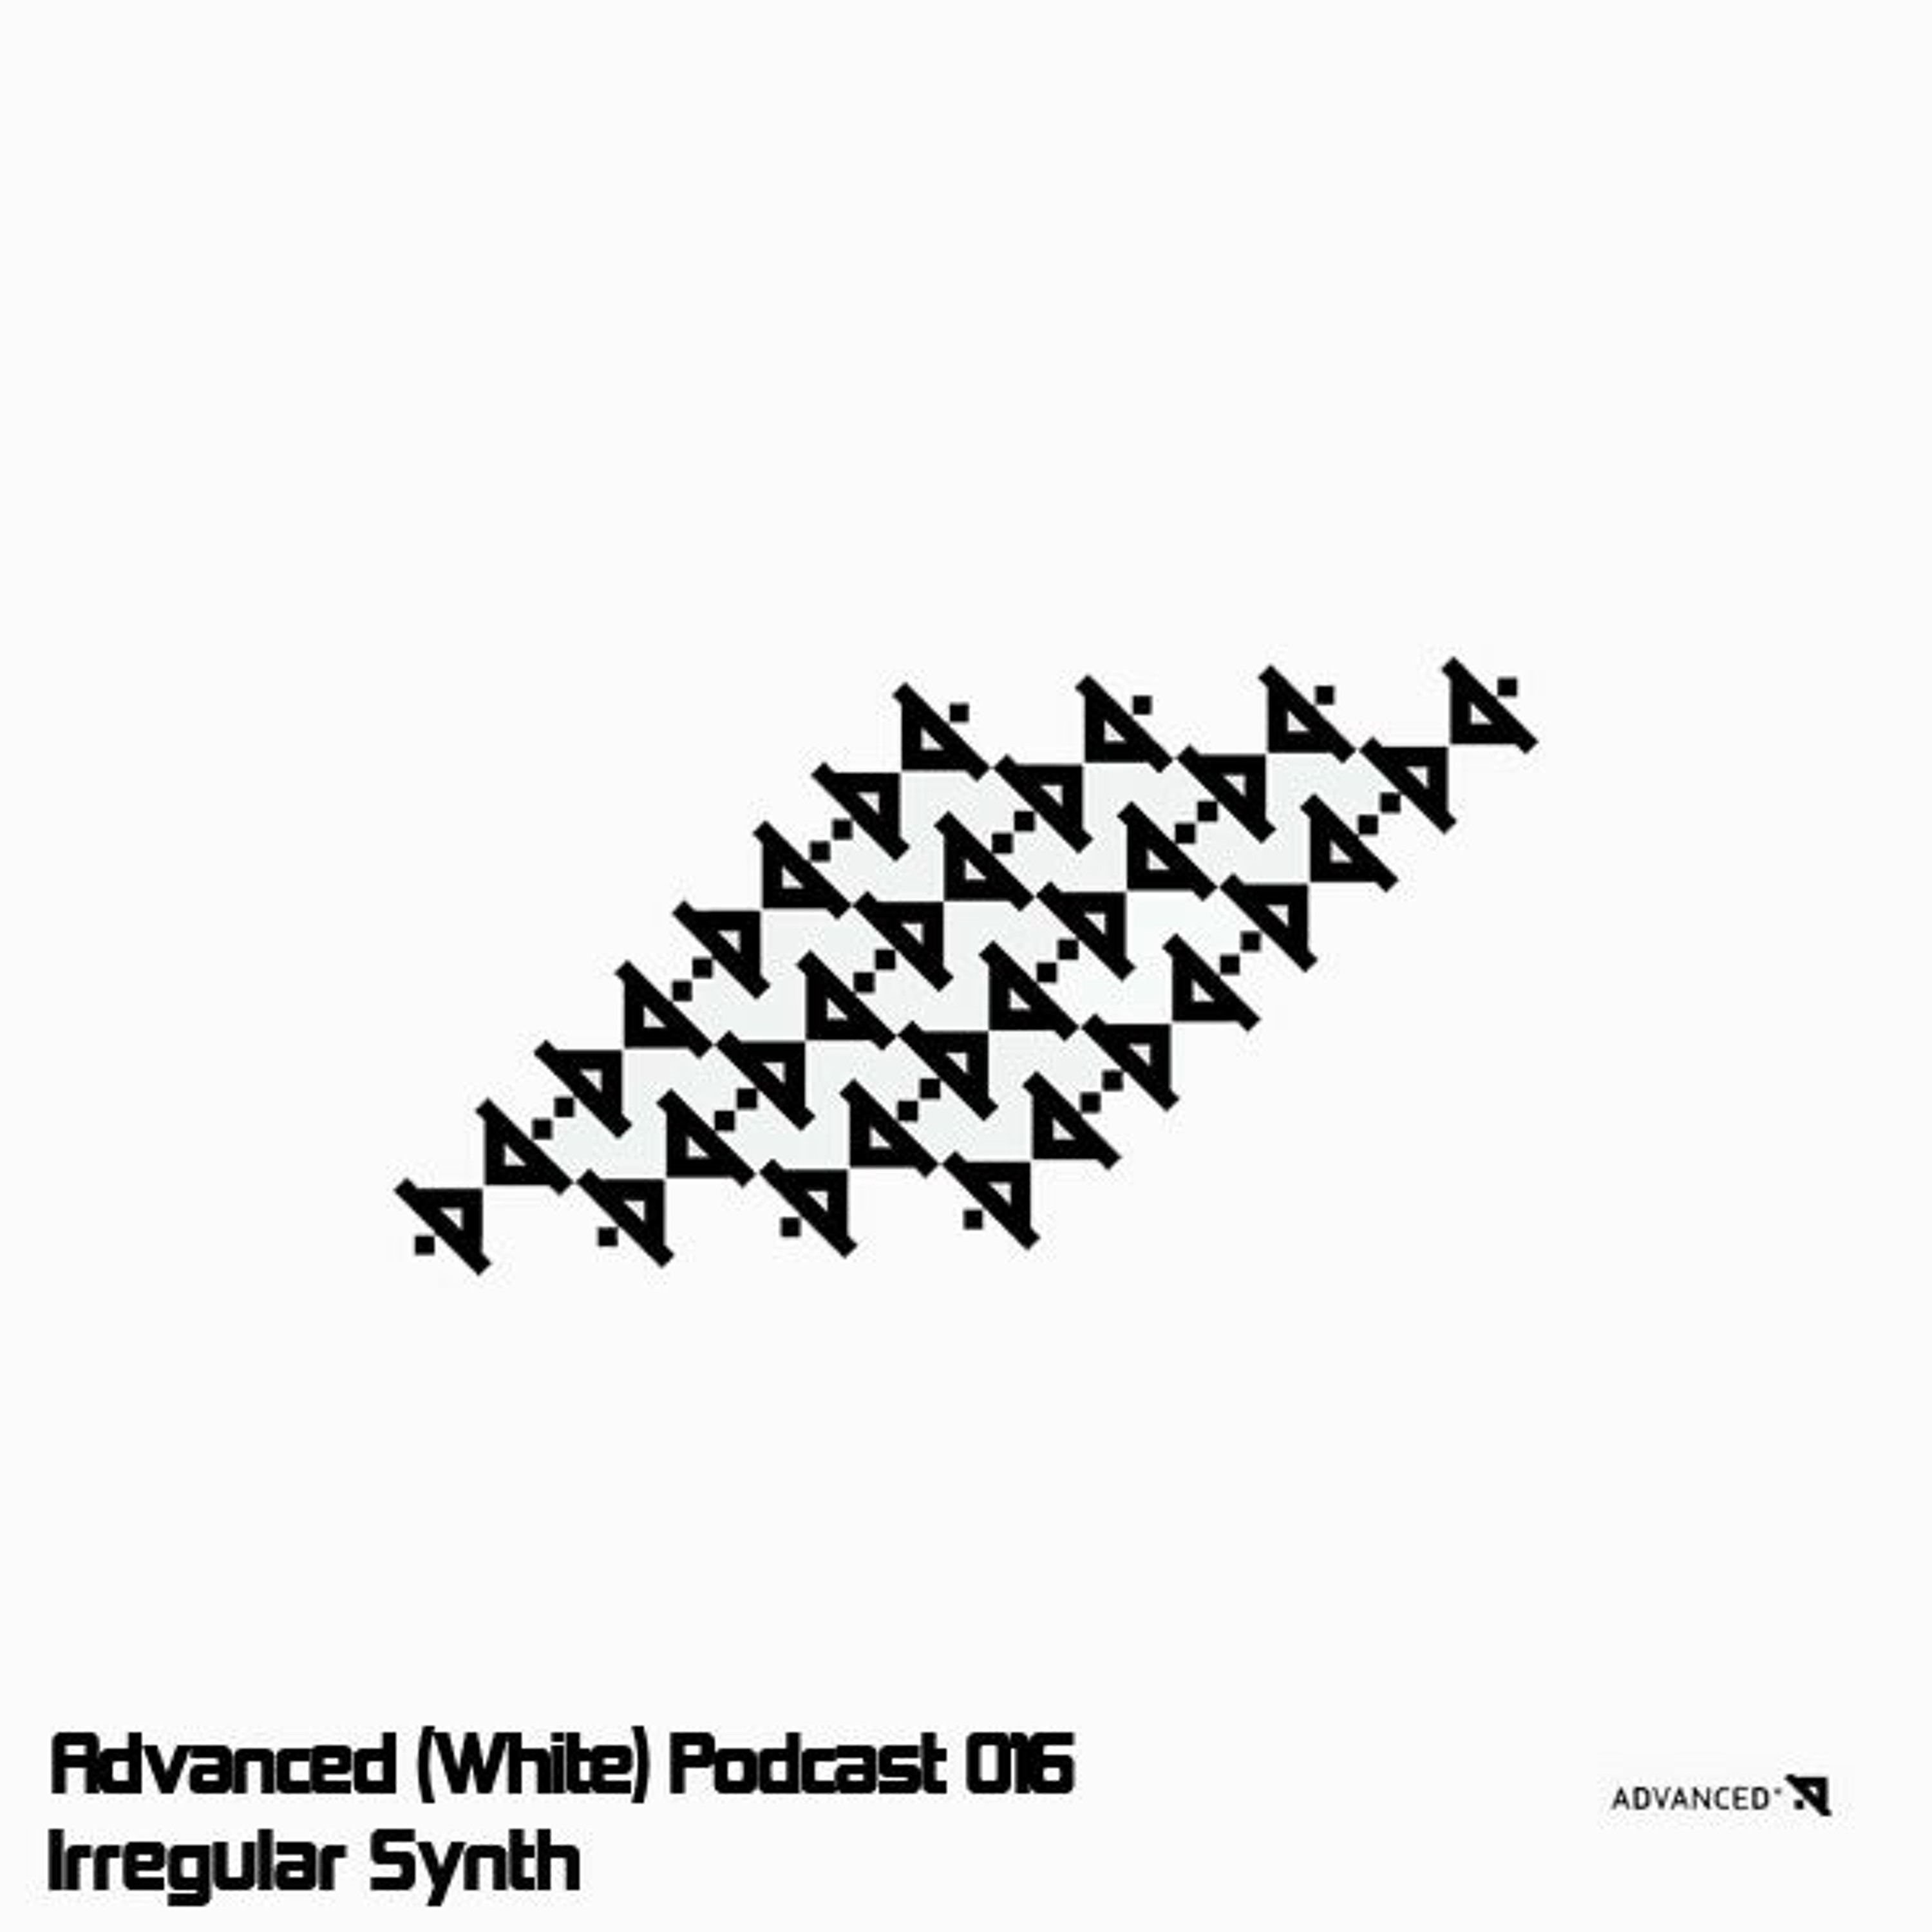 Advanced (White) Podcast 016 with Irregular Synth (Recorded at Bunker, Miami, U.S.A.)